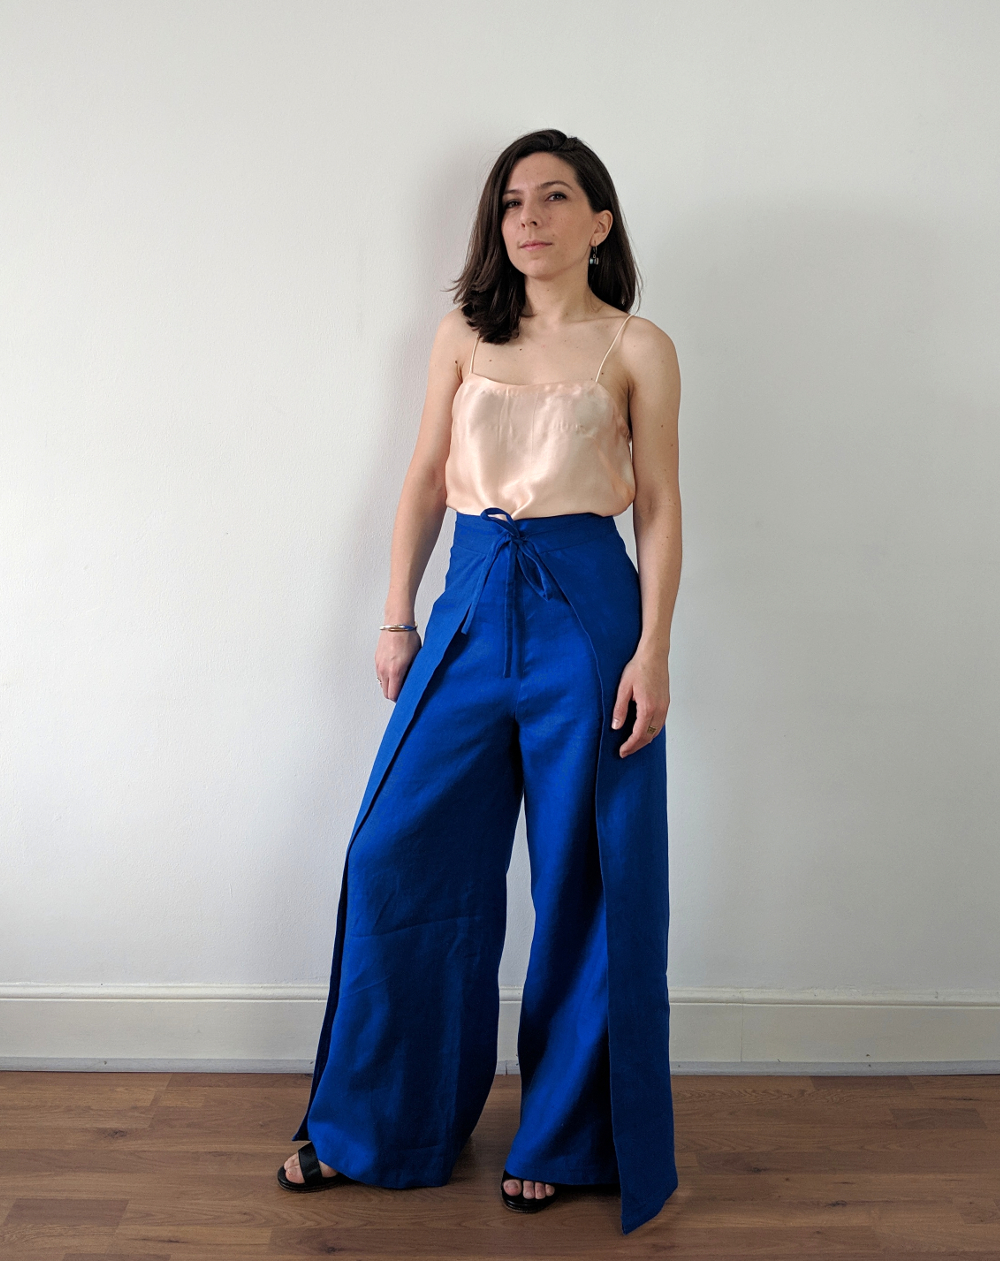 Woman wearing the Mirage Culottes and Trousers sewing pattern by Camimade. A trouser pattern made in cotton, linen, viscose, double or triple crepe fabrics, featuring a wrap style, front or back ties and wide legs.